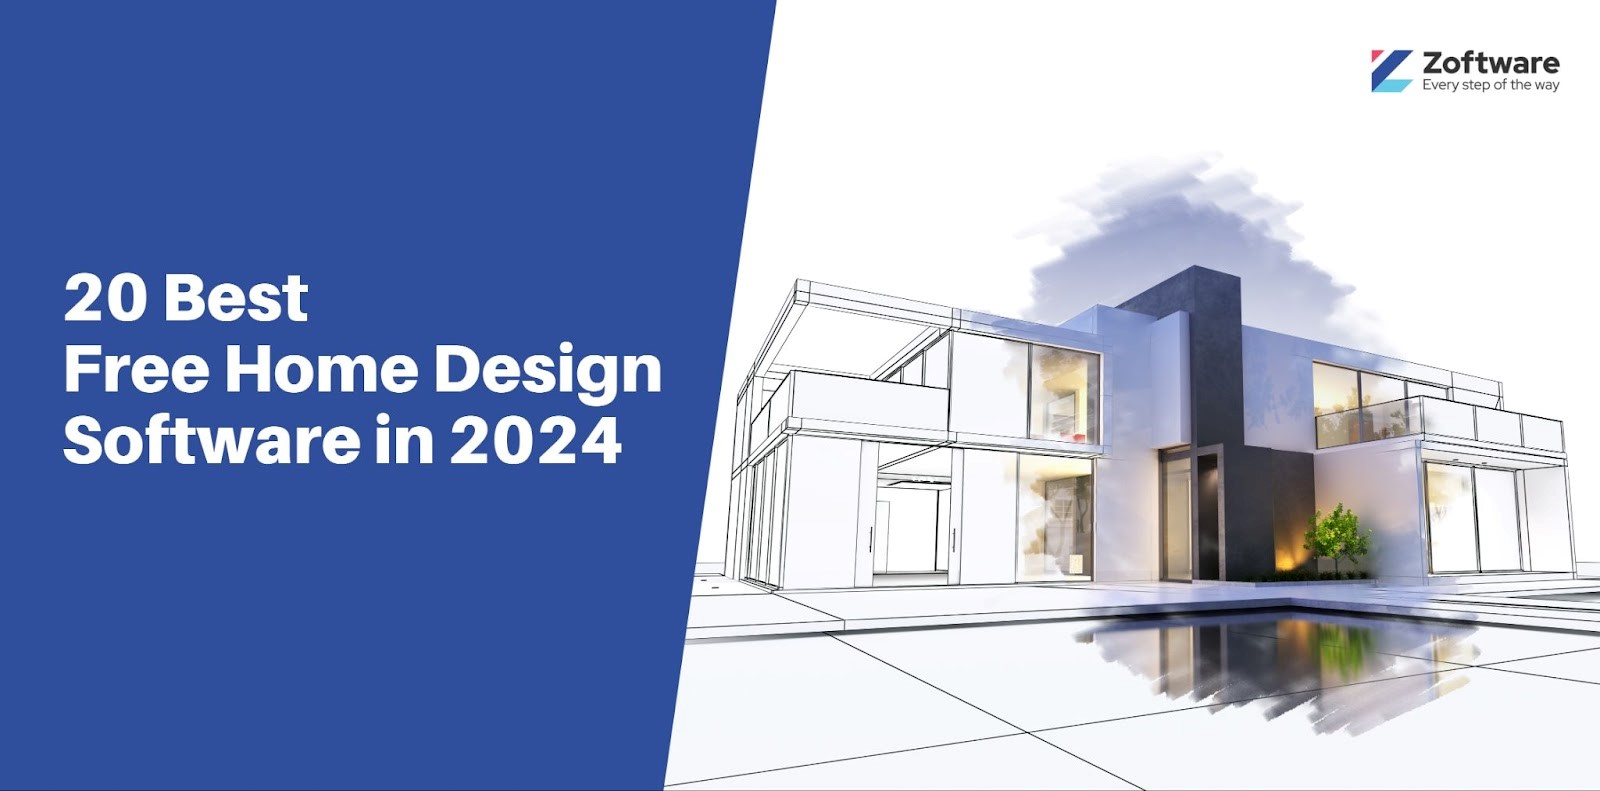 20 Best Free Home Design Software in 2024